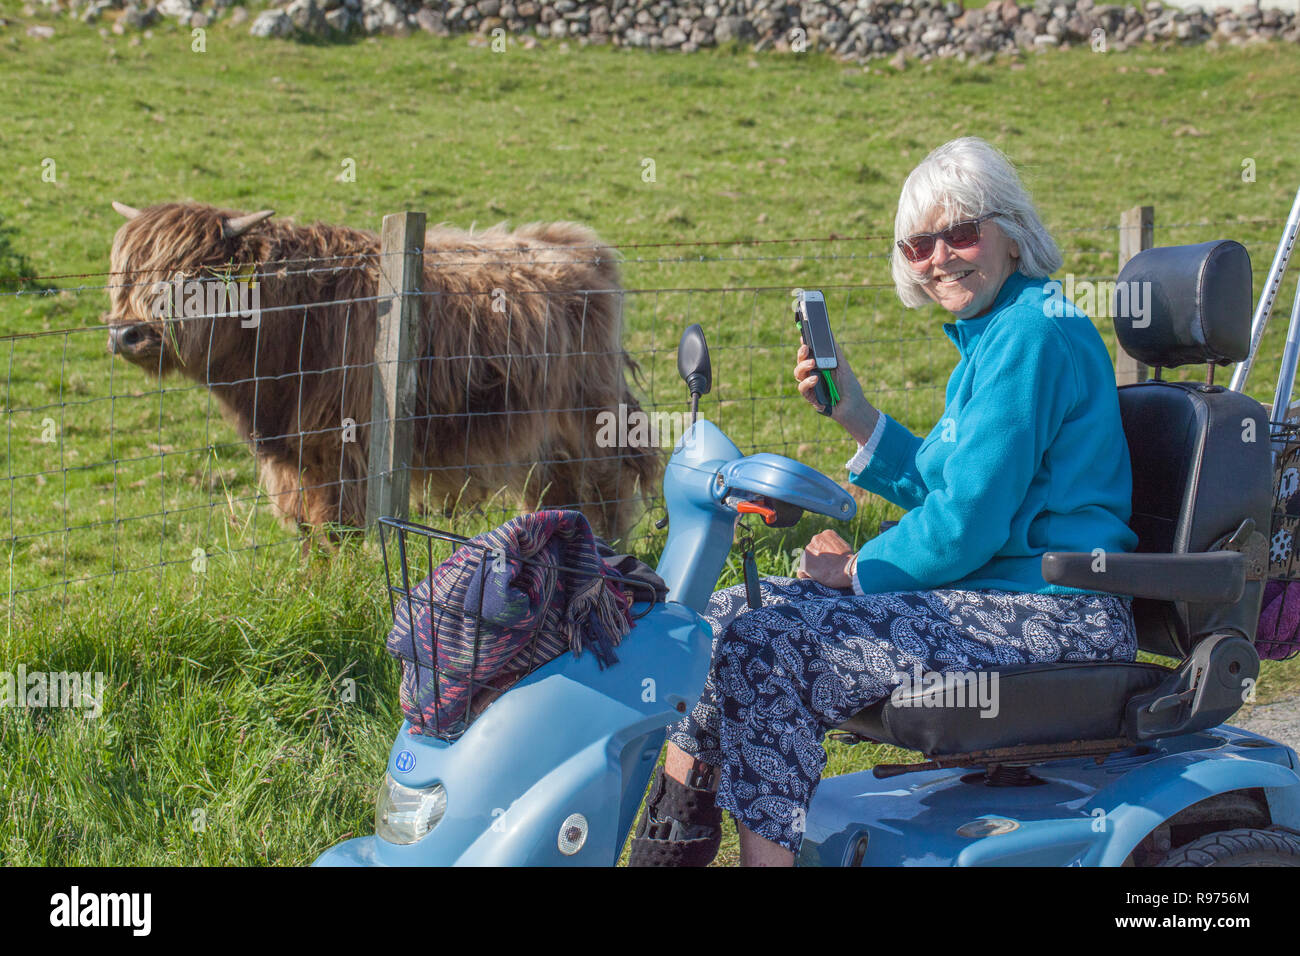 Senior Citizen with physical difficulties, able to access rural environment, including a highland cow, with the provision of electric mobility vehicle or 'buggy'. The Island of Iona. The inner Hebrides. Scotland. Stock Photo